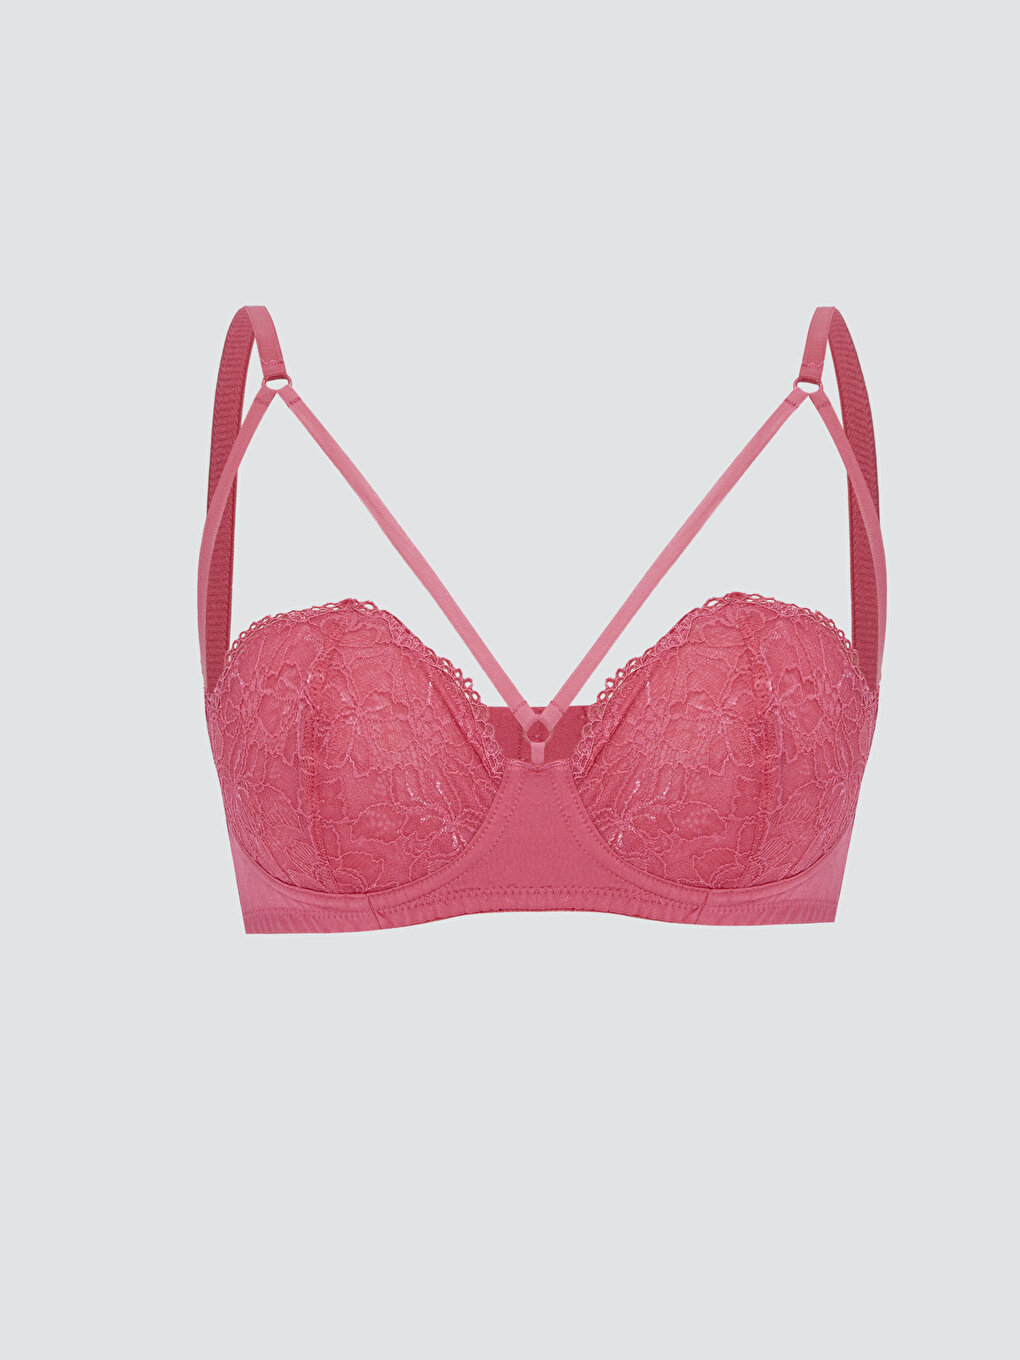 Victoria's Secret 'Very Sexy' Strapless Lace Bustier, Women's